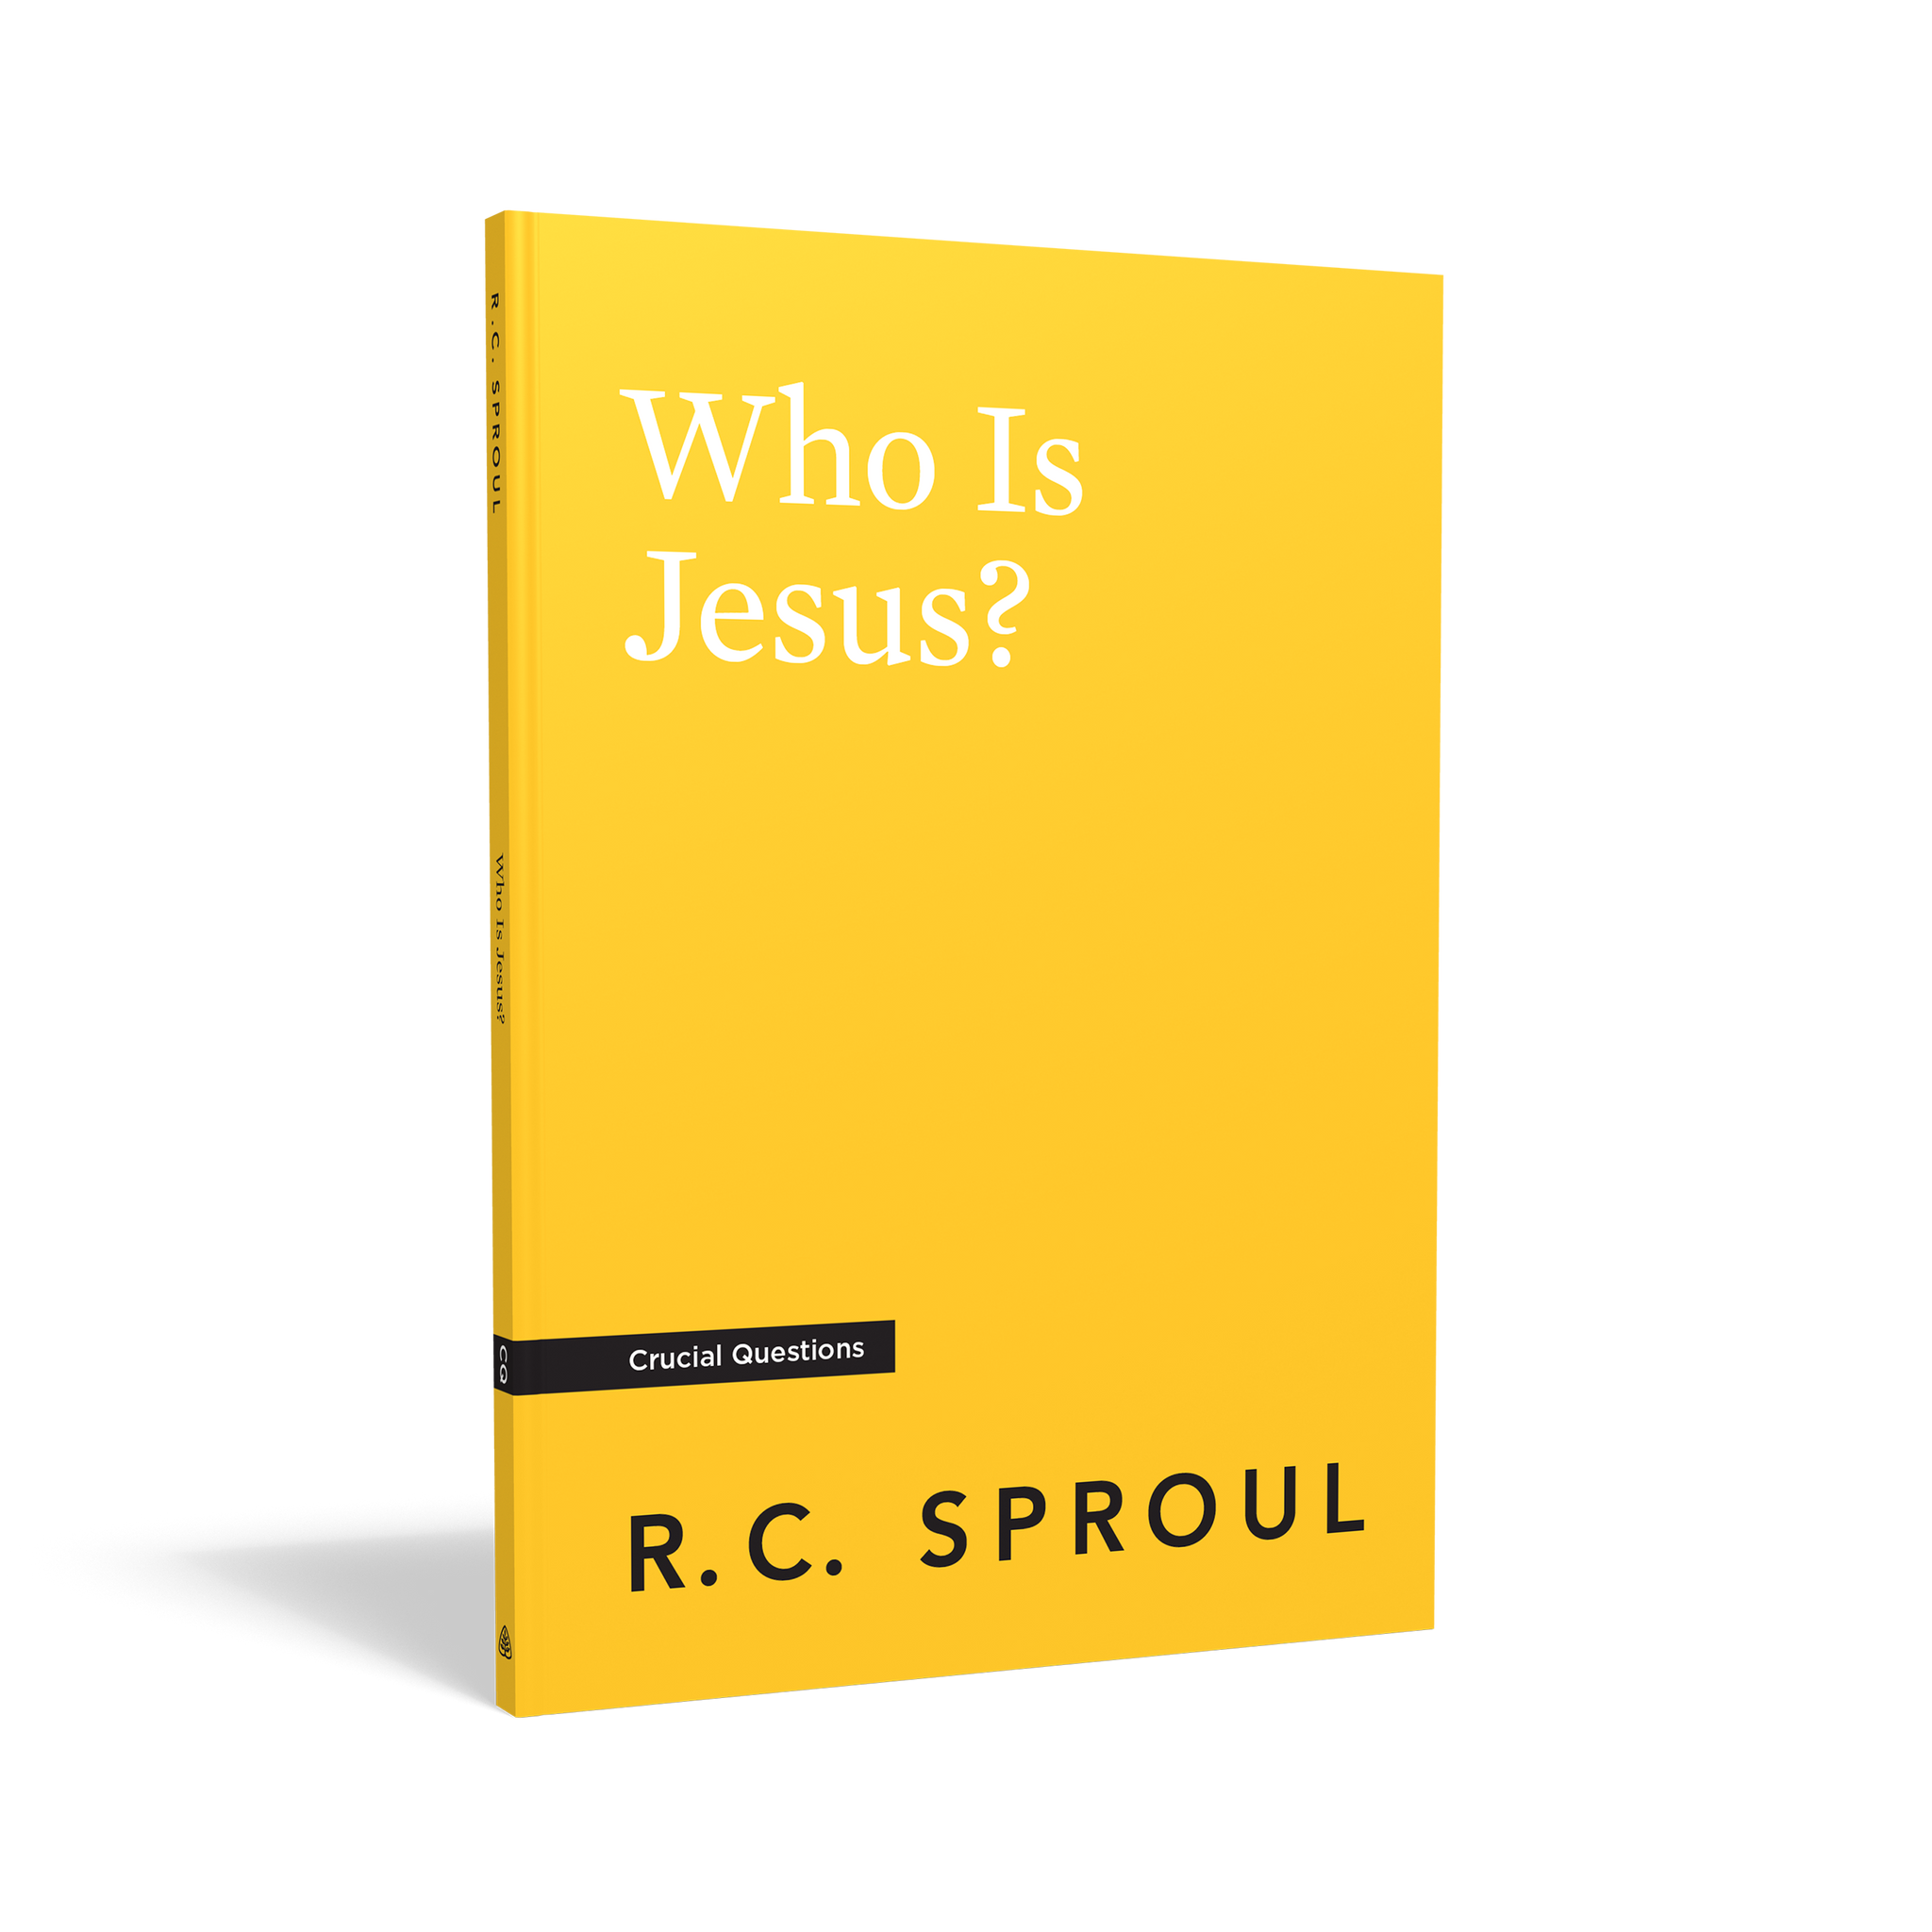 Crucial Questions - Who is Jesus?